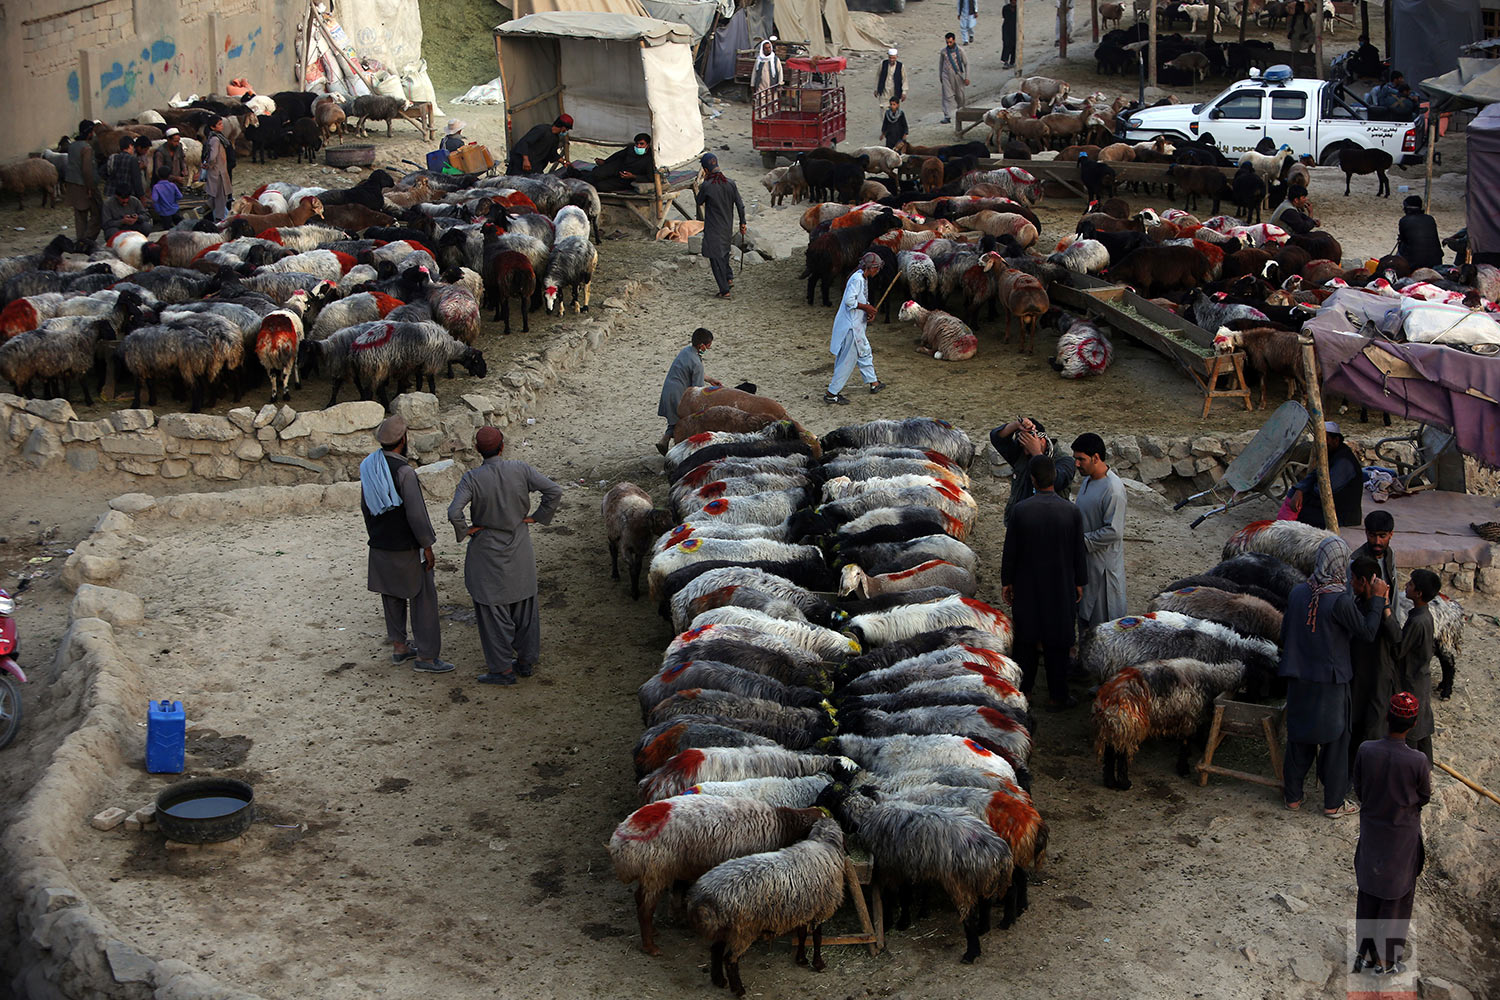  Afghan livestock merchants display animals for sale prior to the upcoming Eid al-Adha holiday, at a market in Kabul, Afghanistan, Tuesday, Aug. 29, 2017. (AP Photo/Rahmat Gul) 